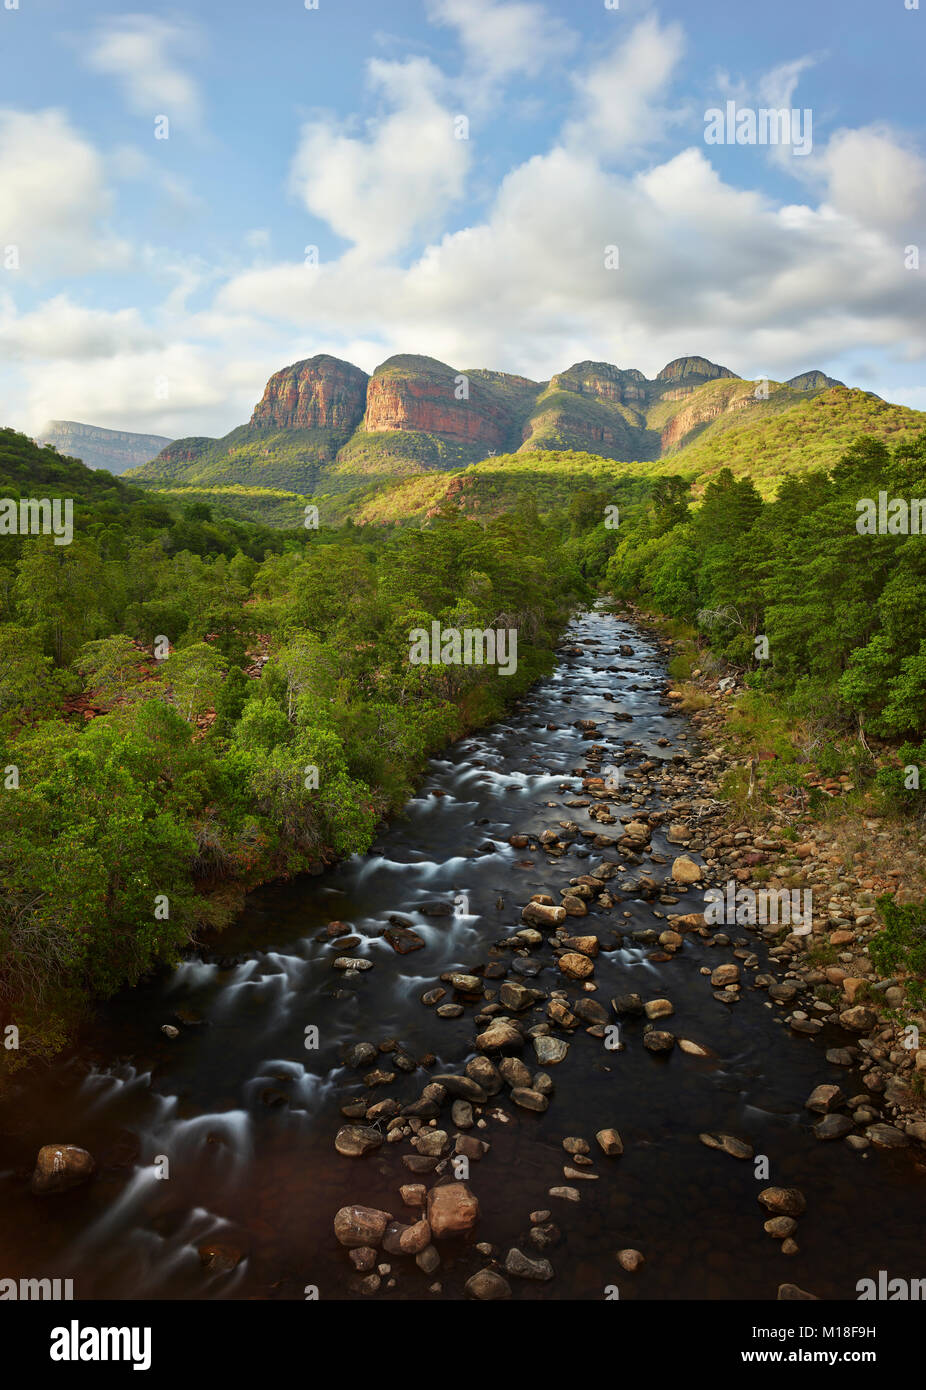 Drakensberge,Three Rondavels,River Blyde River,Blyde River Canyon,Panorama Route,Mpumalanga Province,South Africa Stock Photo